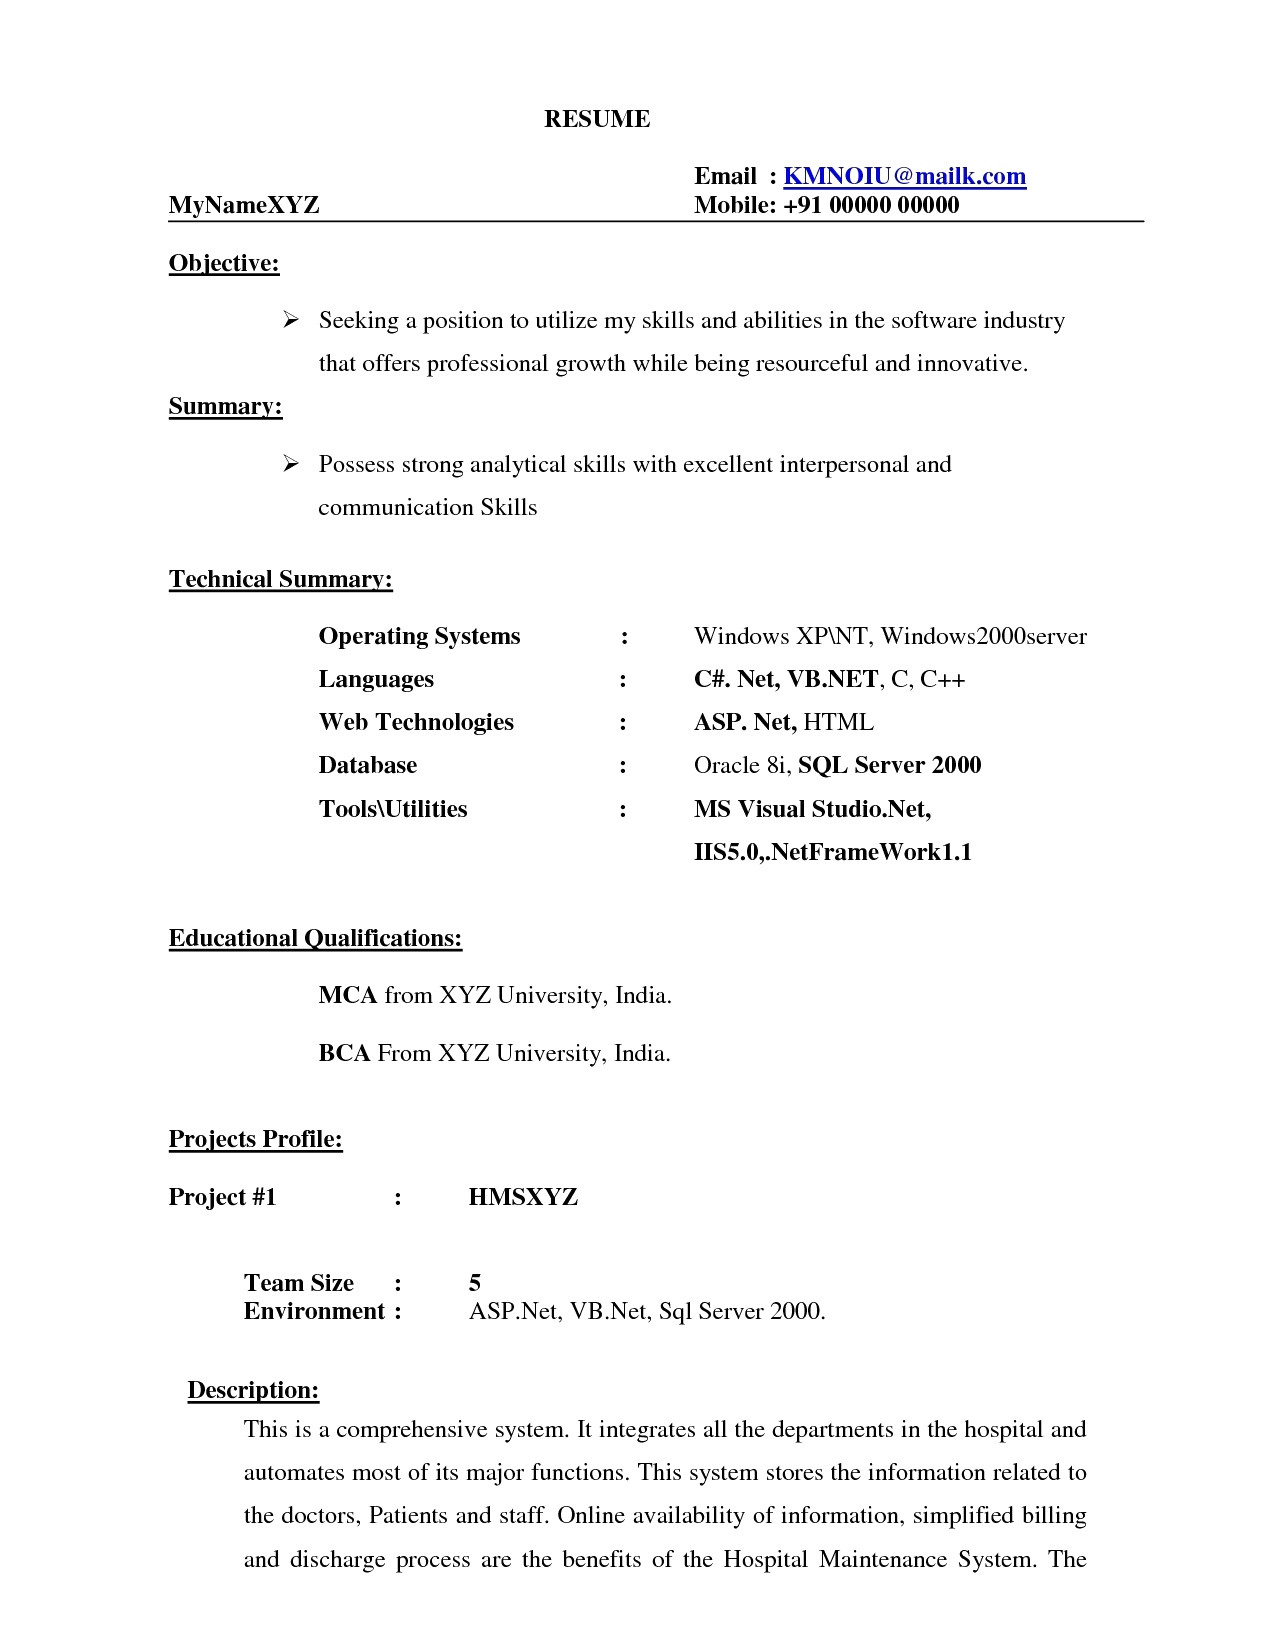 resume samples for freshers in india